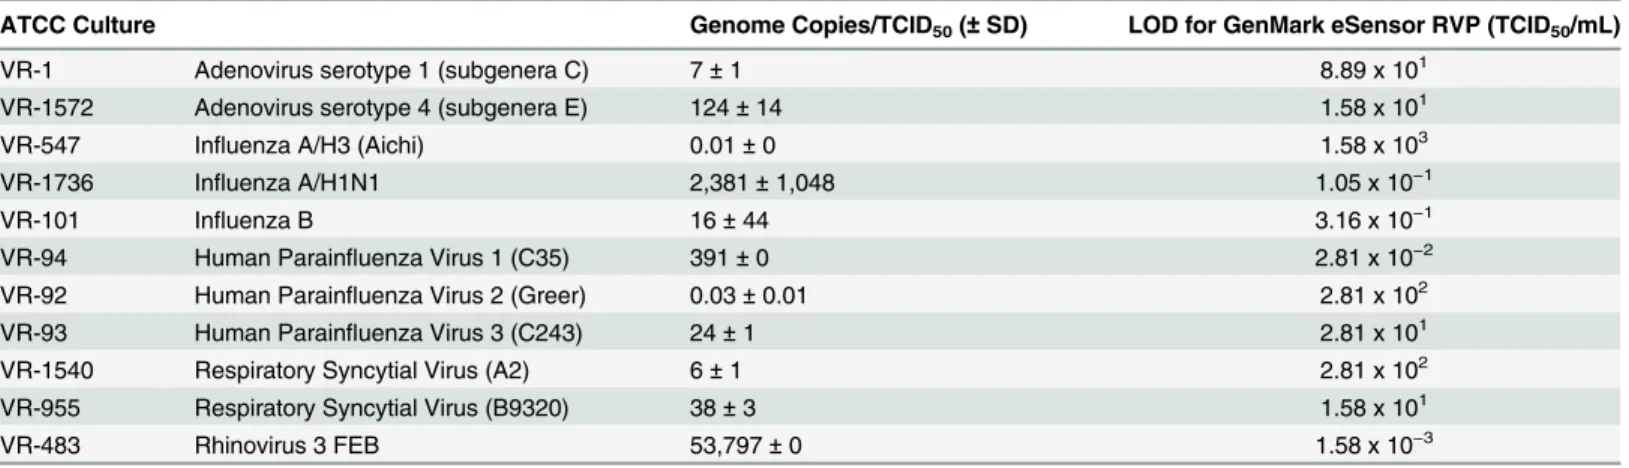 Table 3. Relationship between TCID50/mL concentrations and copy number.